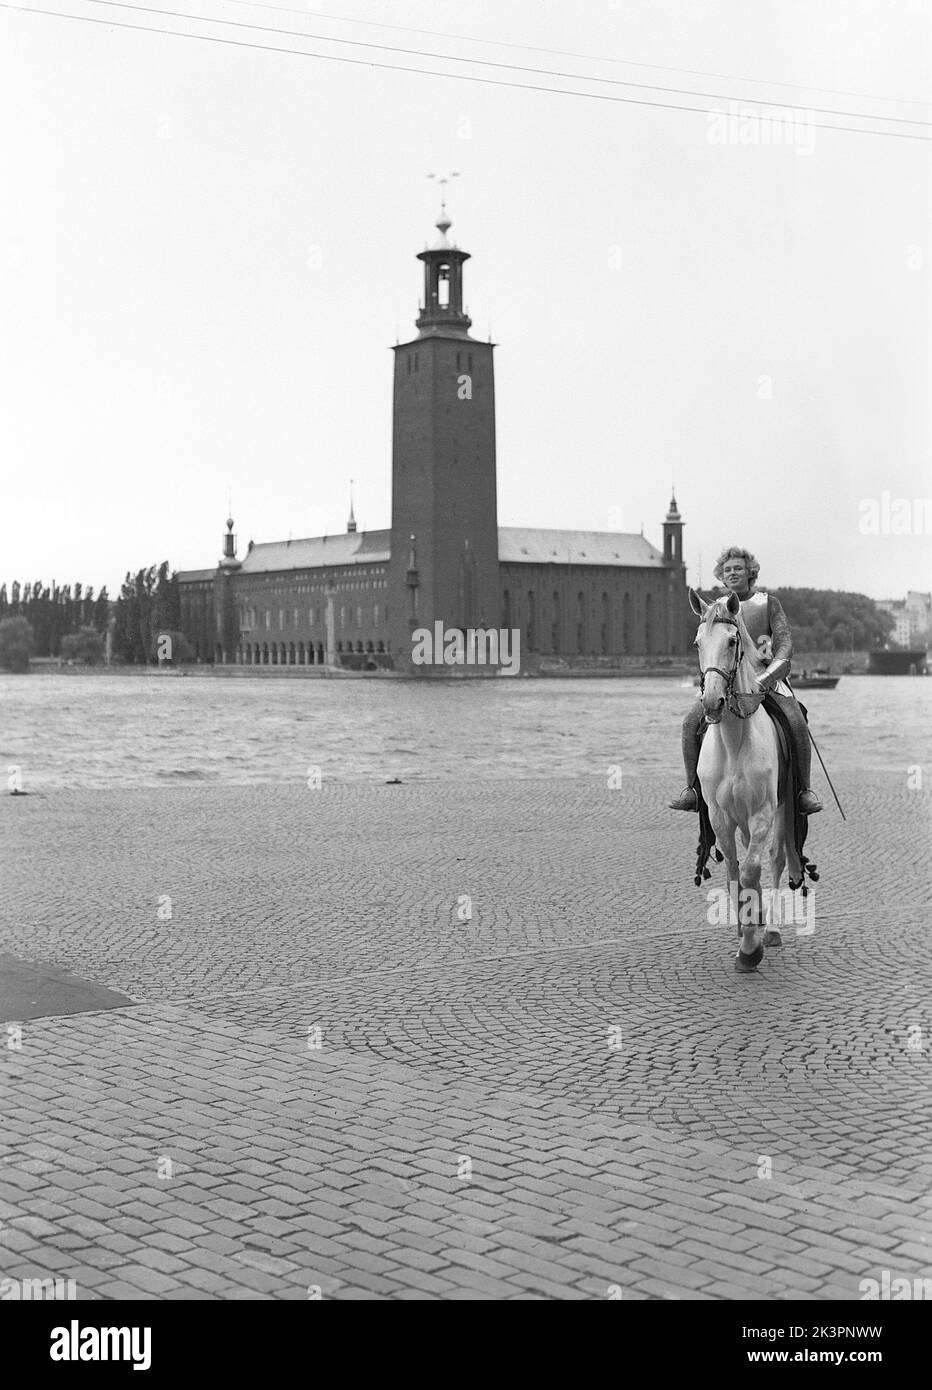 In the 1940s. The american movie Jeanne d'Arc is being promoted for it's premiere screening and Kerstin Bergo was chosen to act as Ingrid Bergman in the pr-stunt. She both looked a bit like Ingrid Bergman and could ride. In the background Stockholm city hall.  Stockholm Sweden 1949. Kristoffersson ref AO18-2 Stock Photo